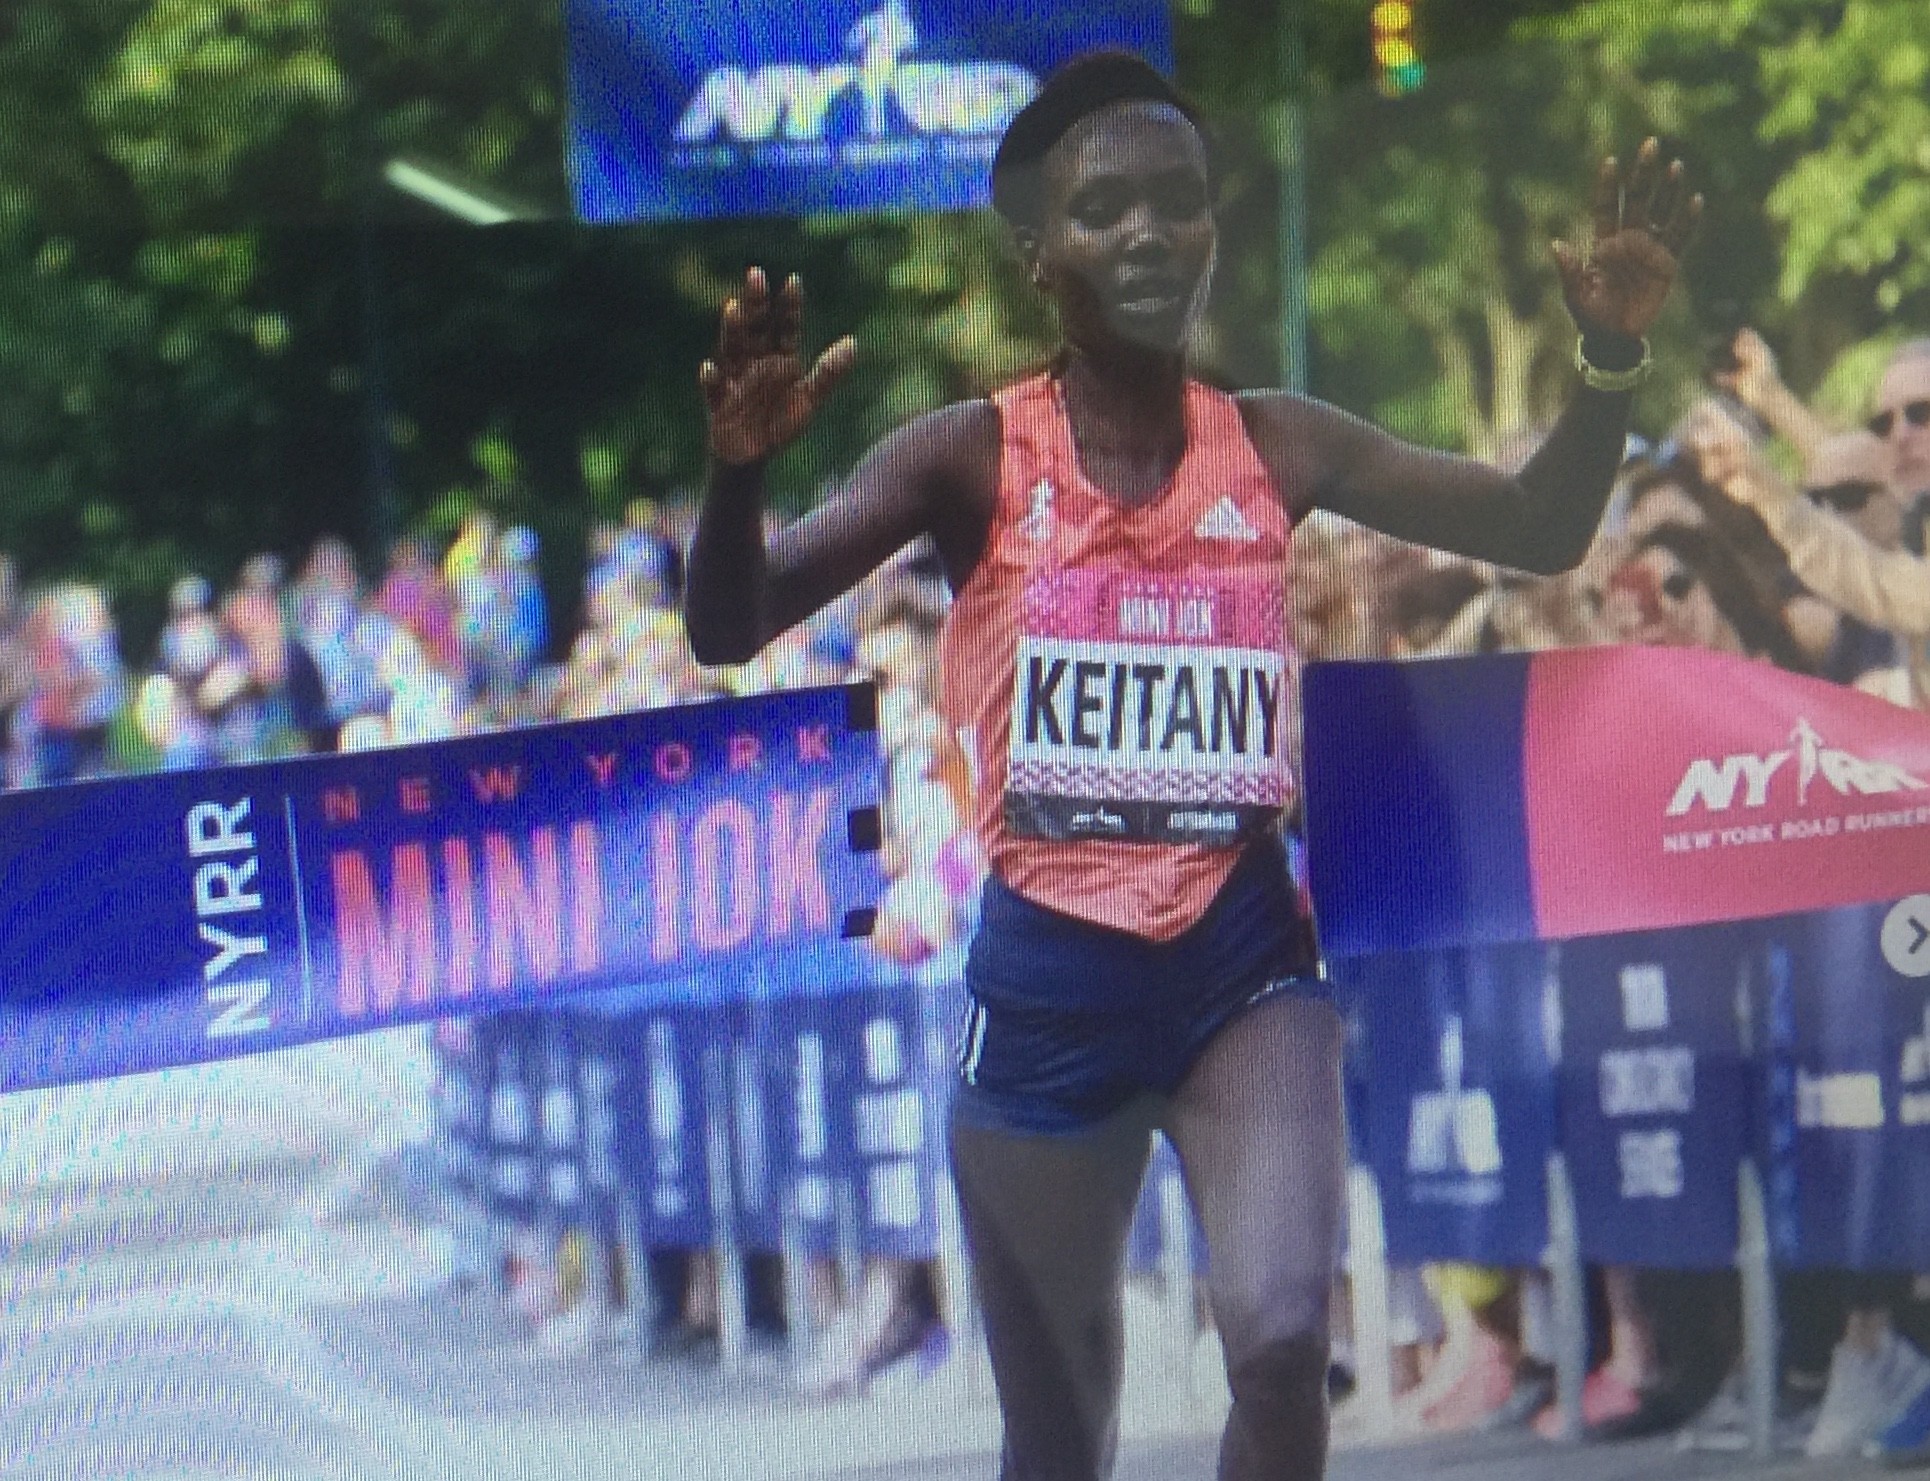 Mary Keitany win the NYRR New York Mini 10K by over one minute